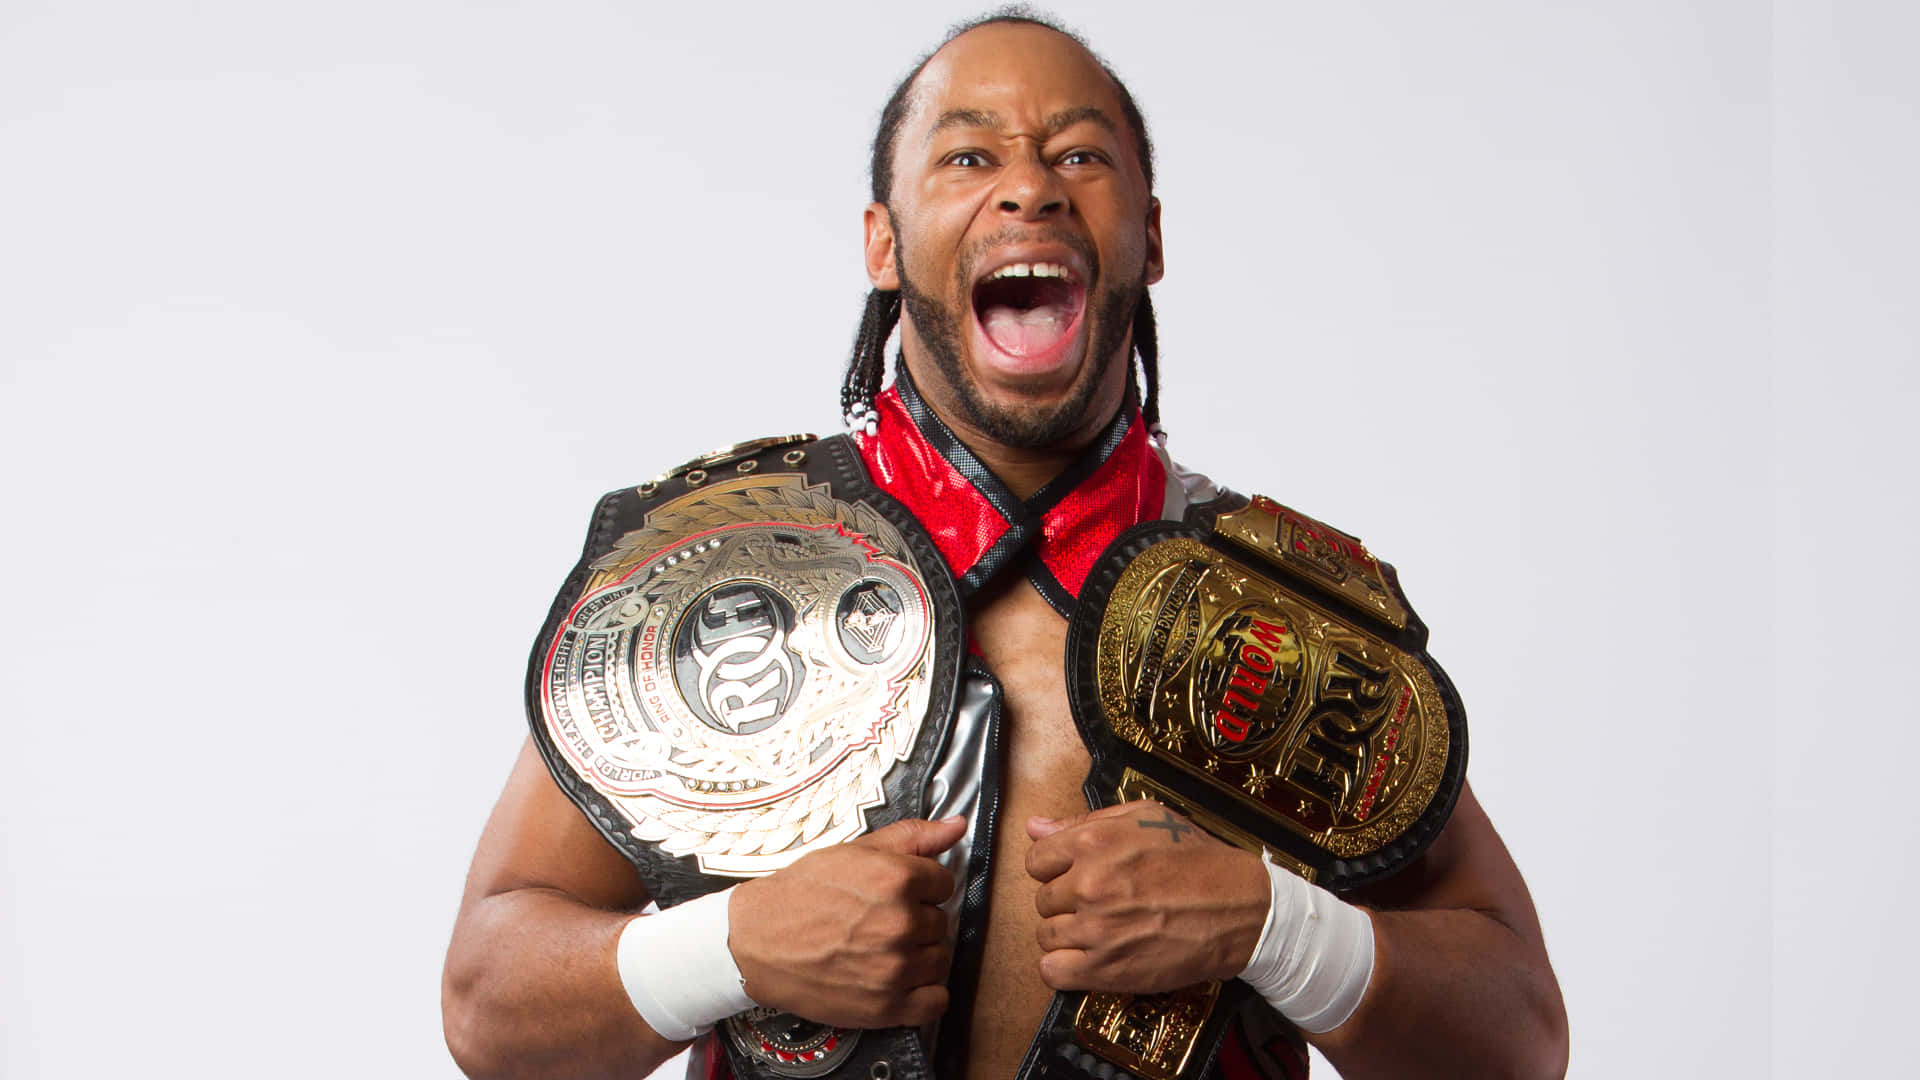 Champion Wrestler Jay Lethal Adorned with ROH Belts Wallpaper